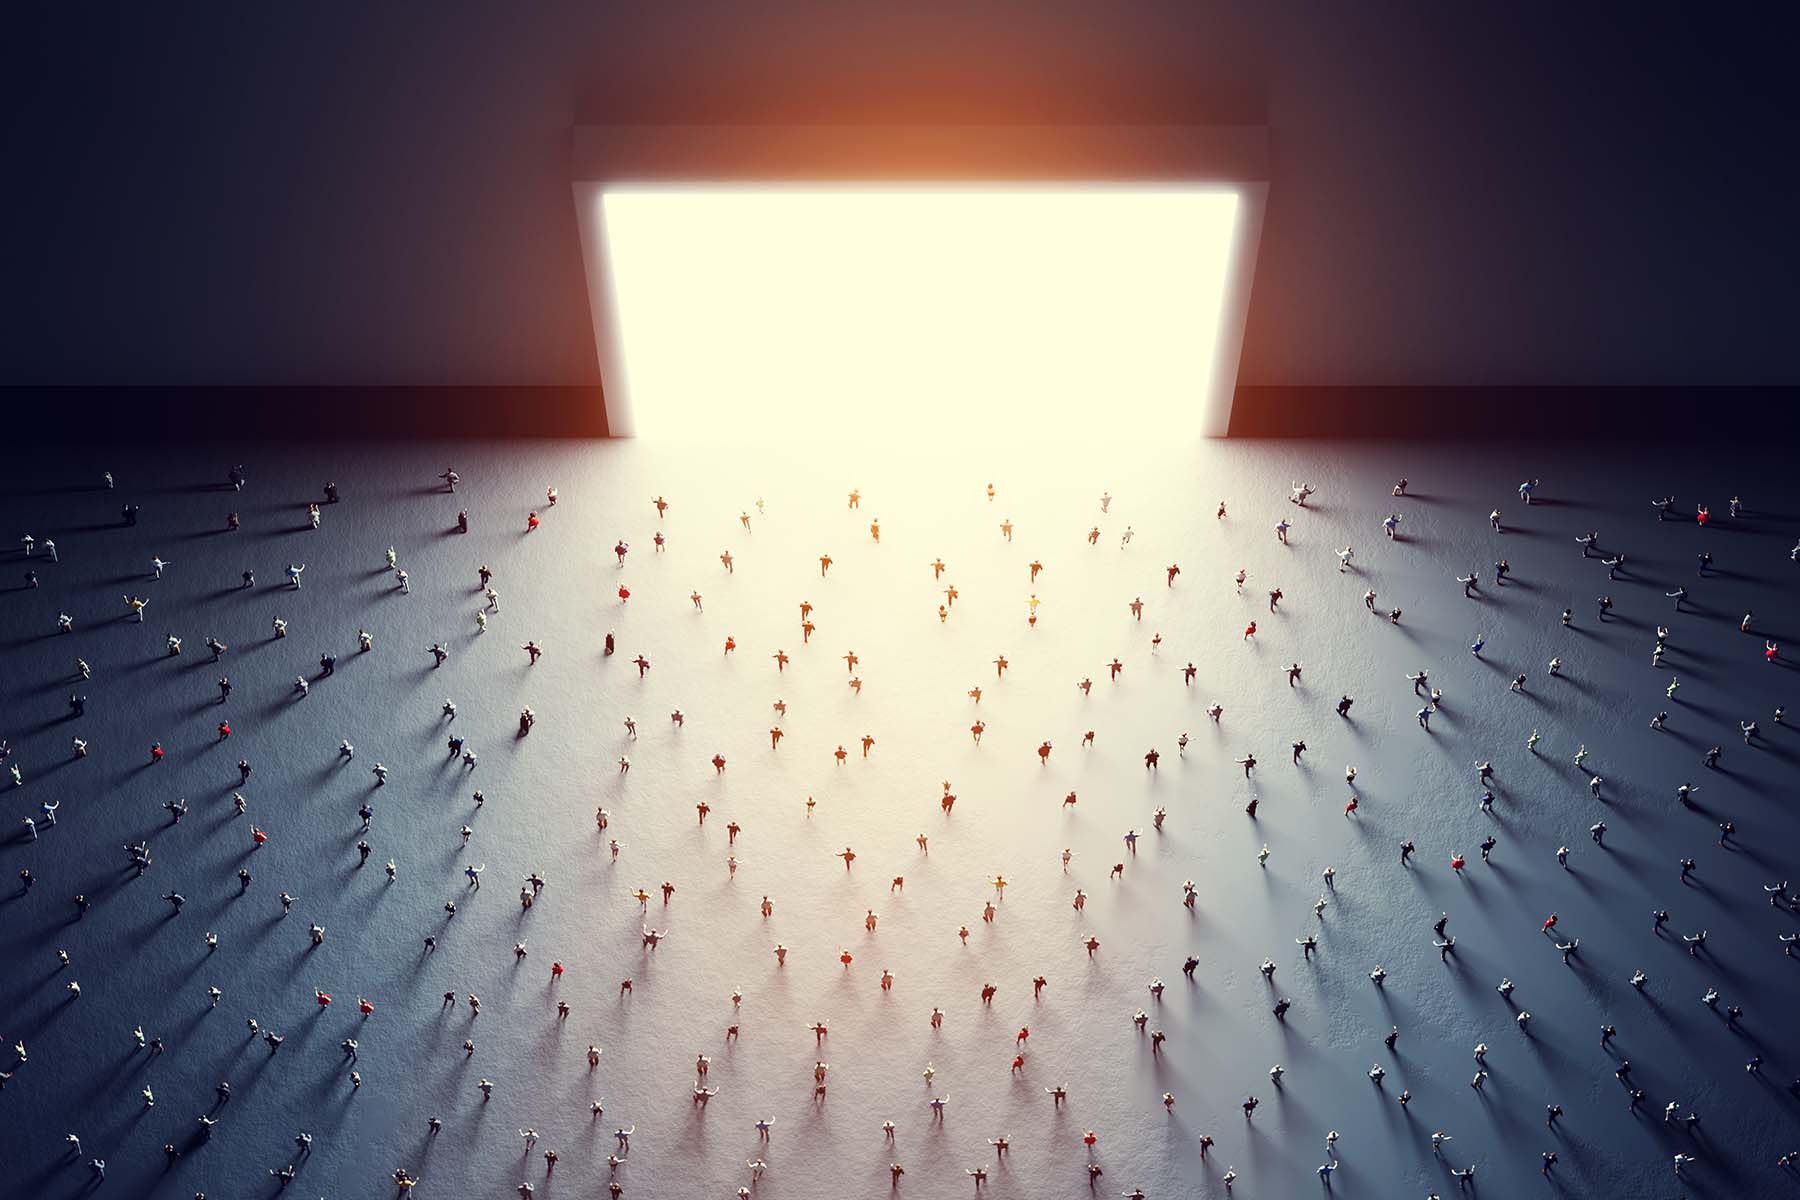 In a 3D illustration, a scattered group of people walk toward a large glowing gate that looks like a large computer screen